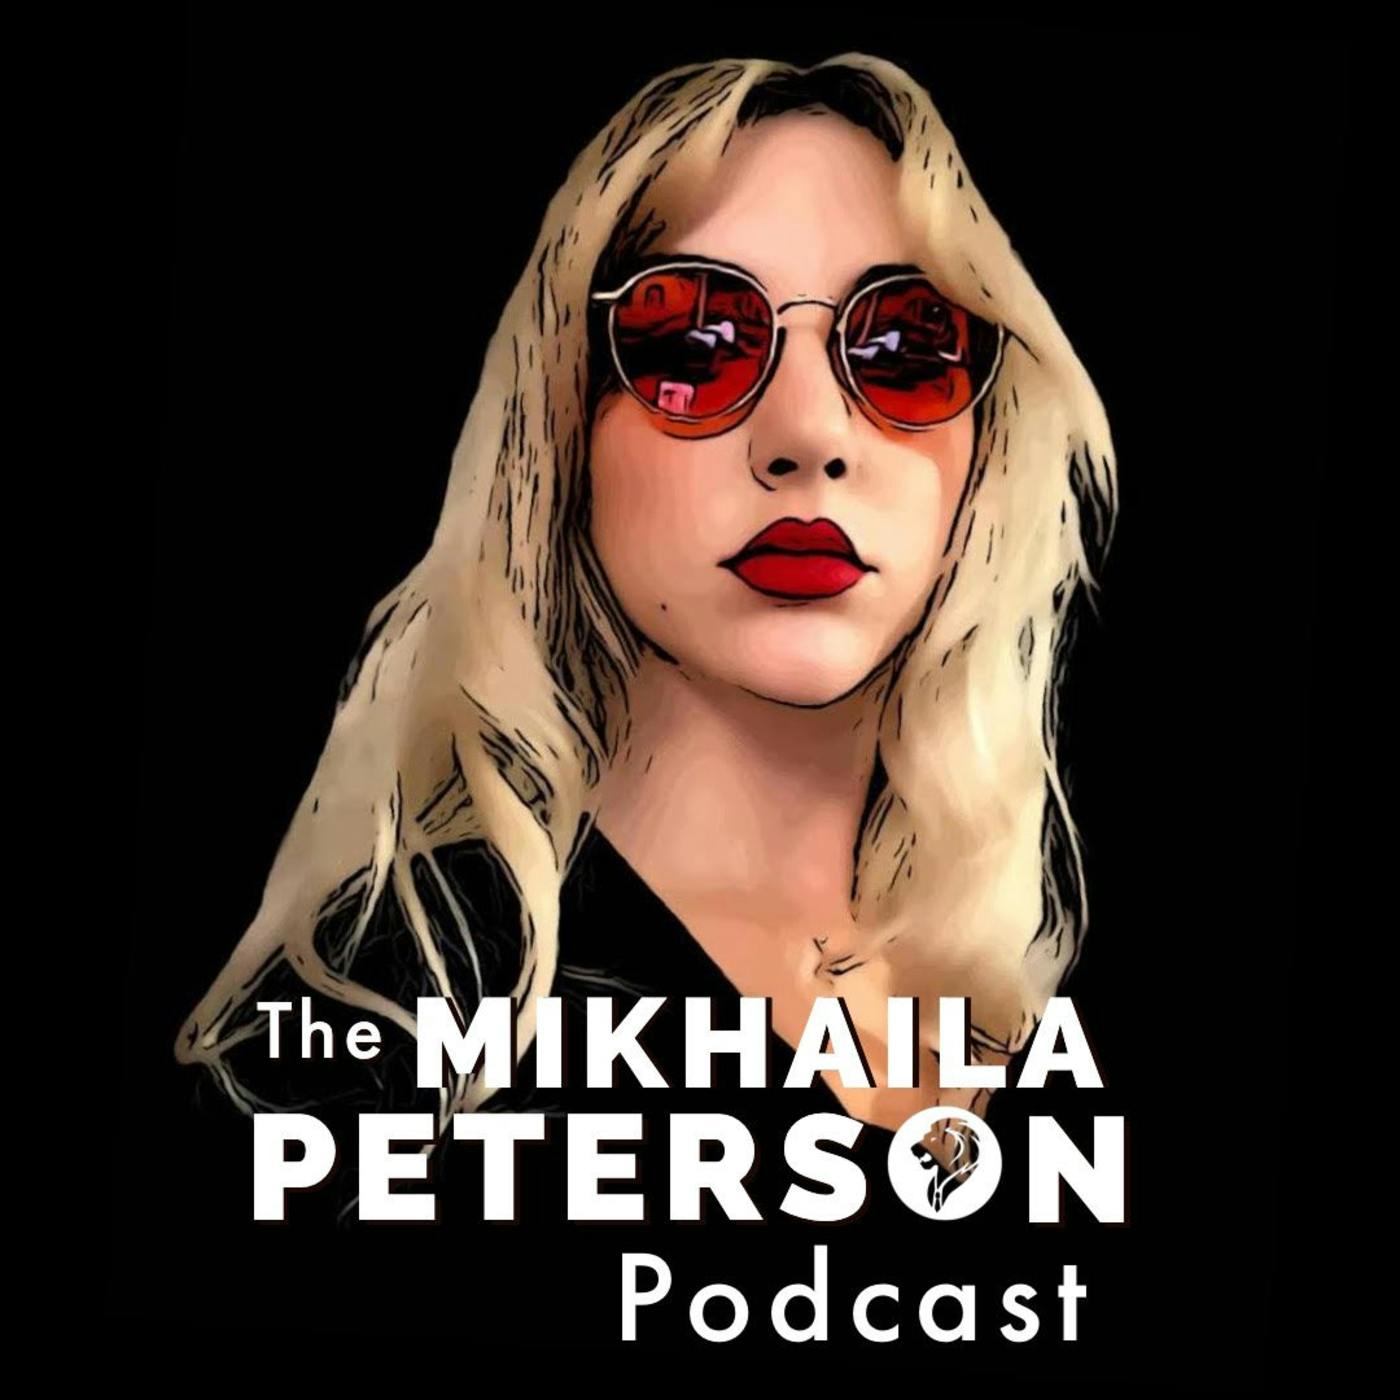 McCurdy Writing Your Own Story The Mikhaila Peterson